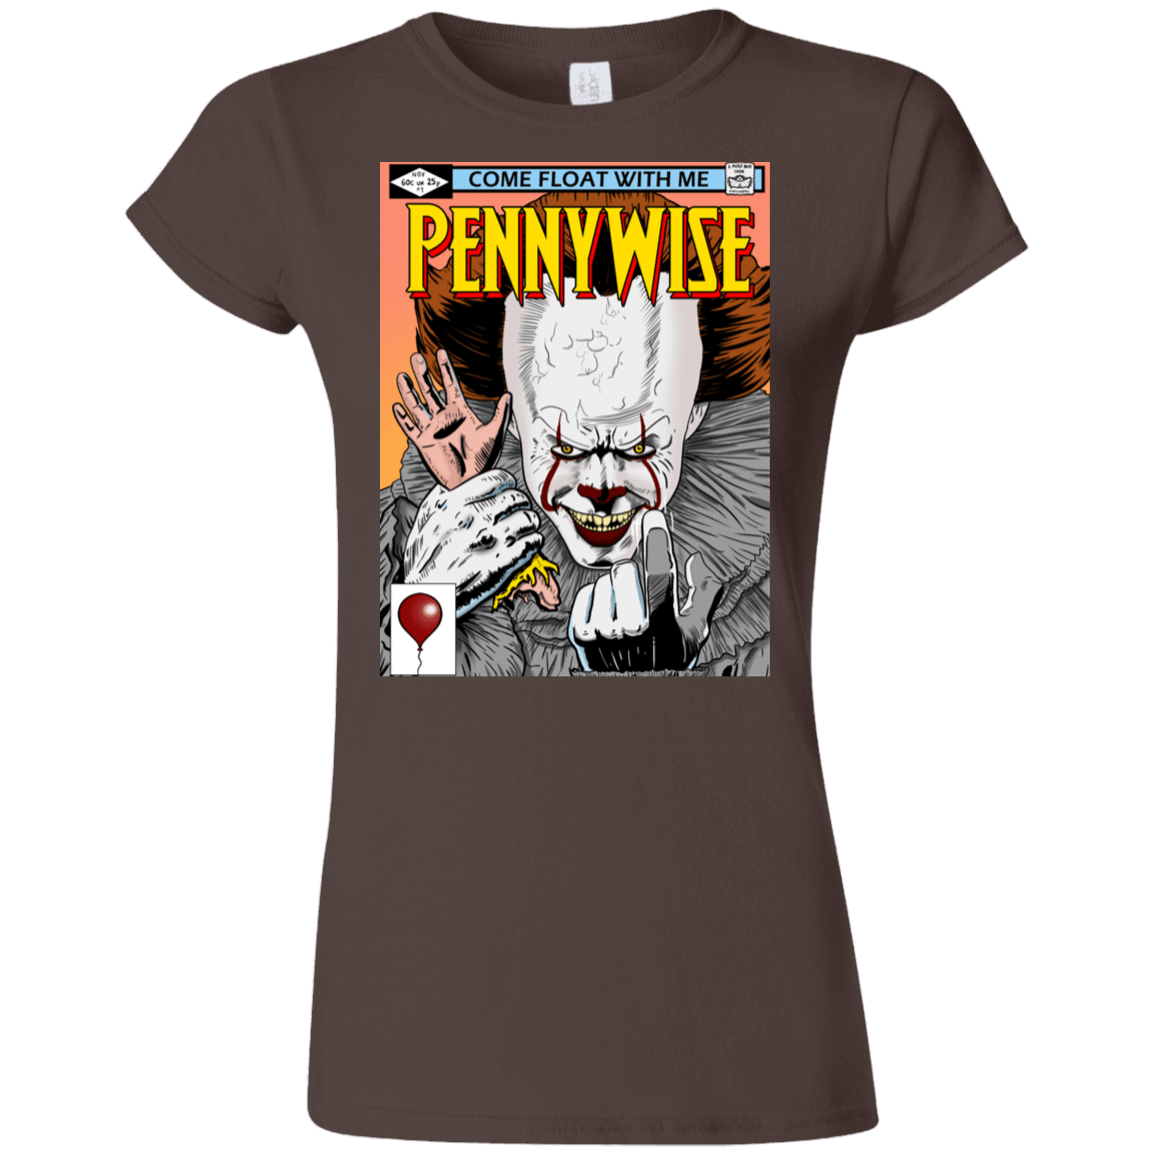 T-Shirts Dark Chocolate / S Pennywise 8+ Junior Slimmer-Fit T-Shirt